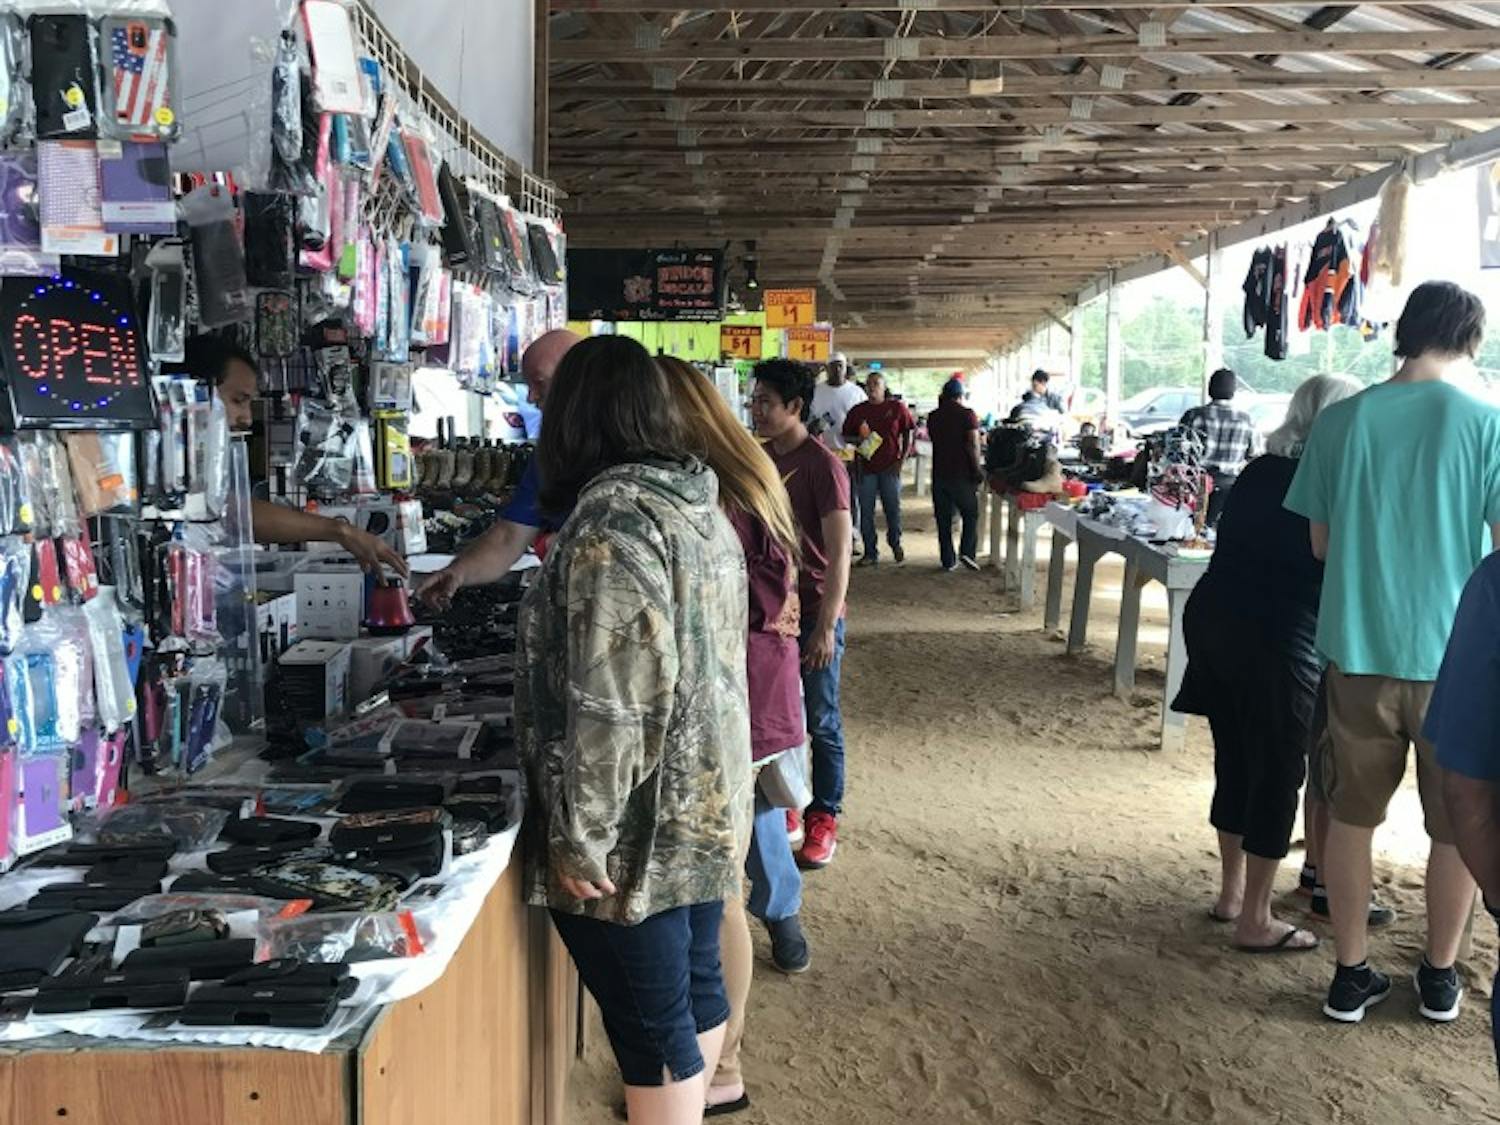 Shoppers browse tables at the Lee County Flea Market in Lee County, Ala.